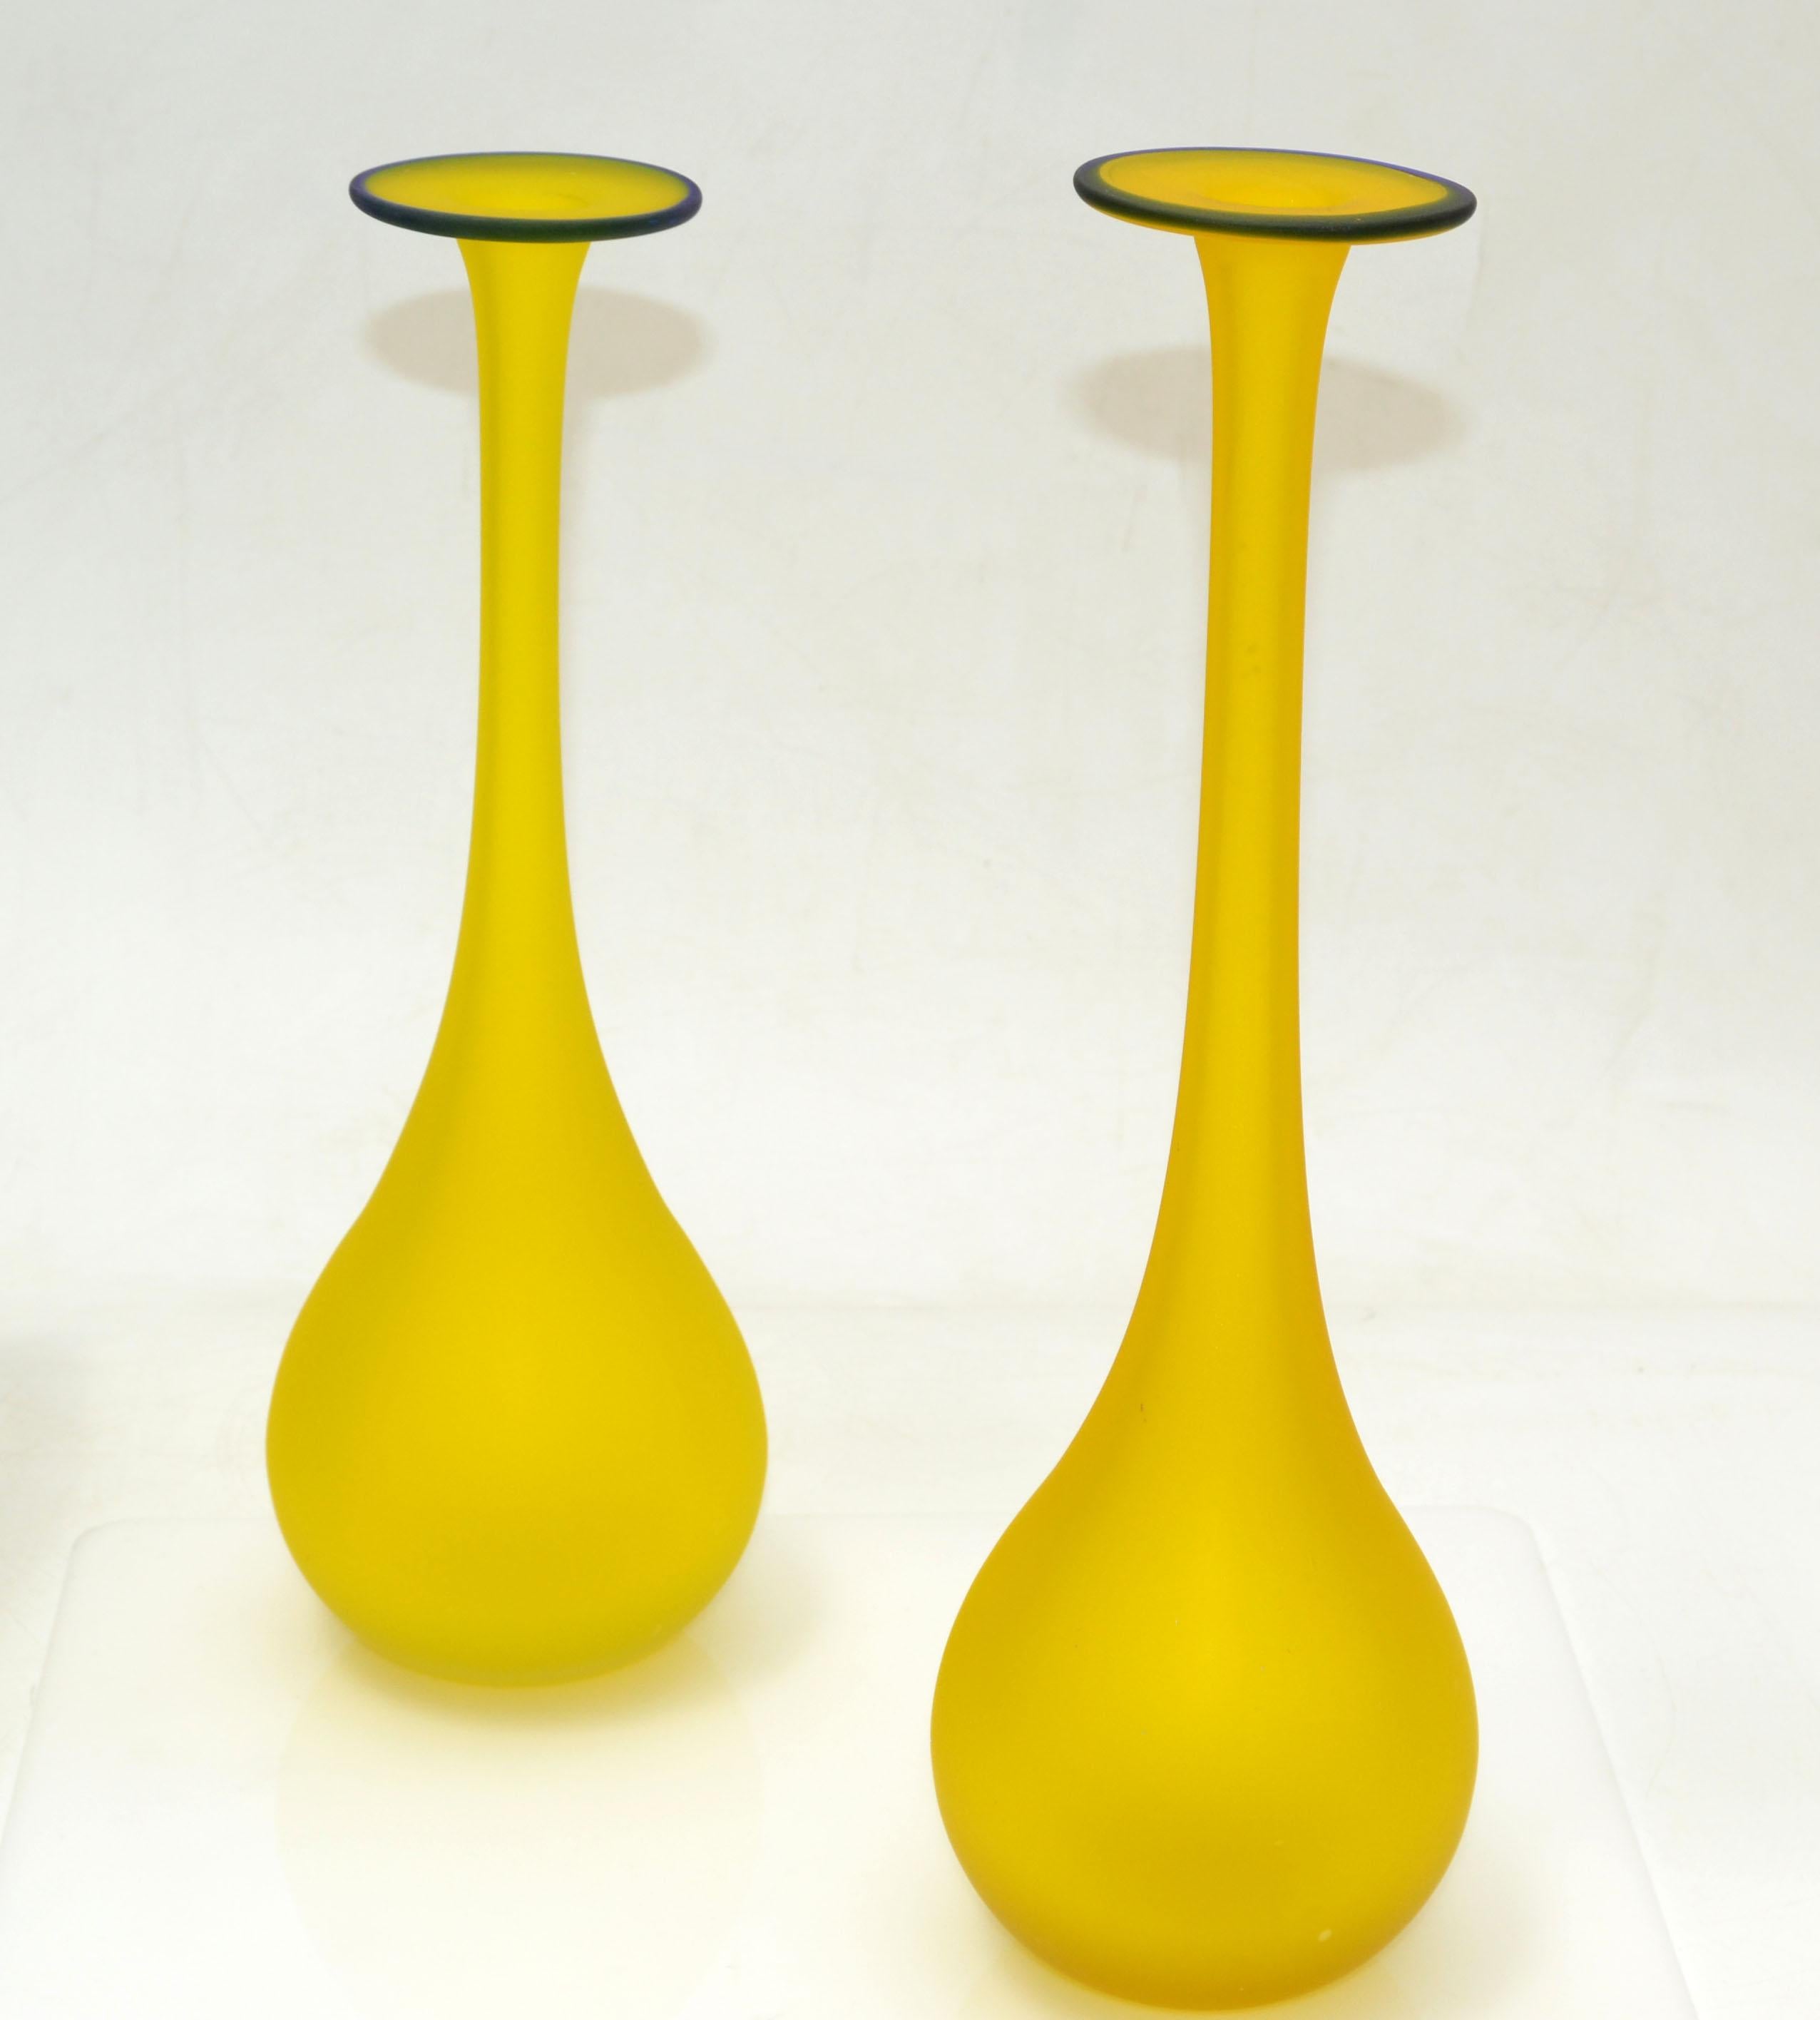 Pair of Carlo Moretti style Mid-Century Modern satin glass bud vase in translucent yellow with a blue opening.
Nesting set, the smaller one is one inch smaller, 11.5 inches.
Very beautiful and clean design.

